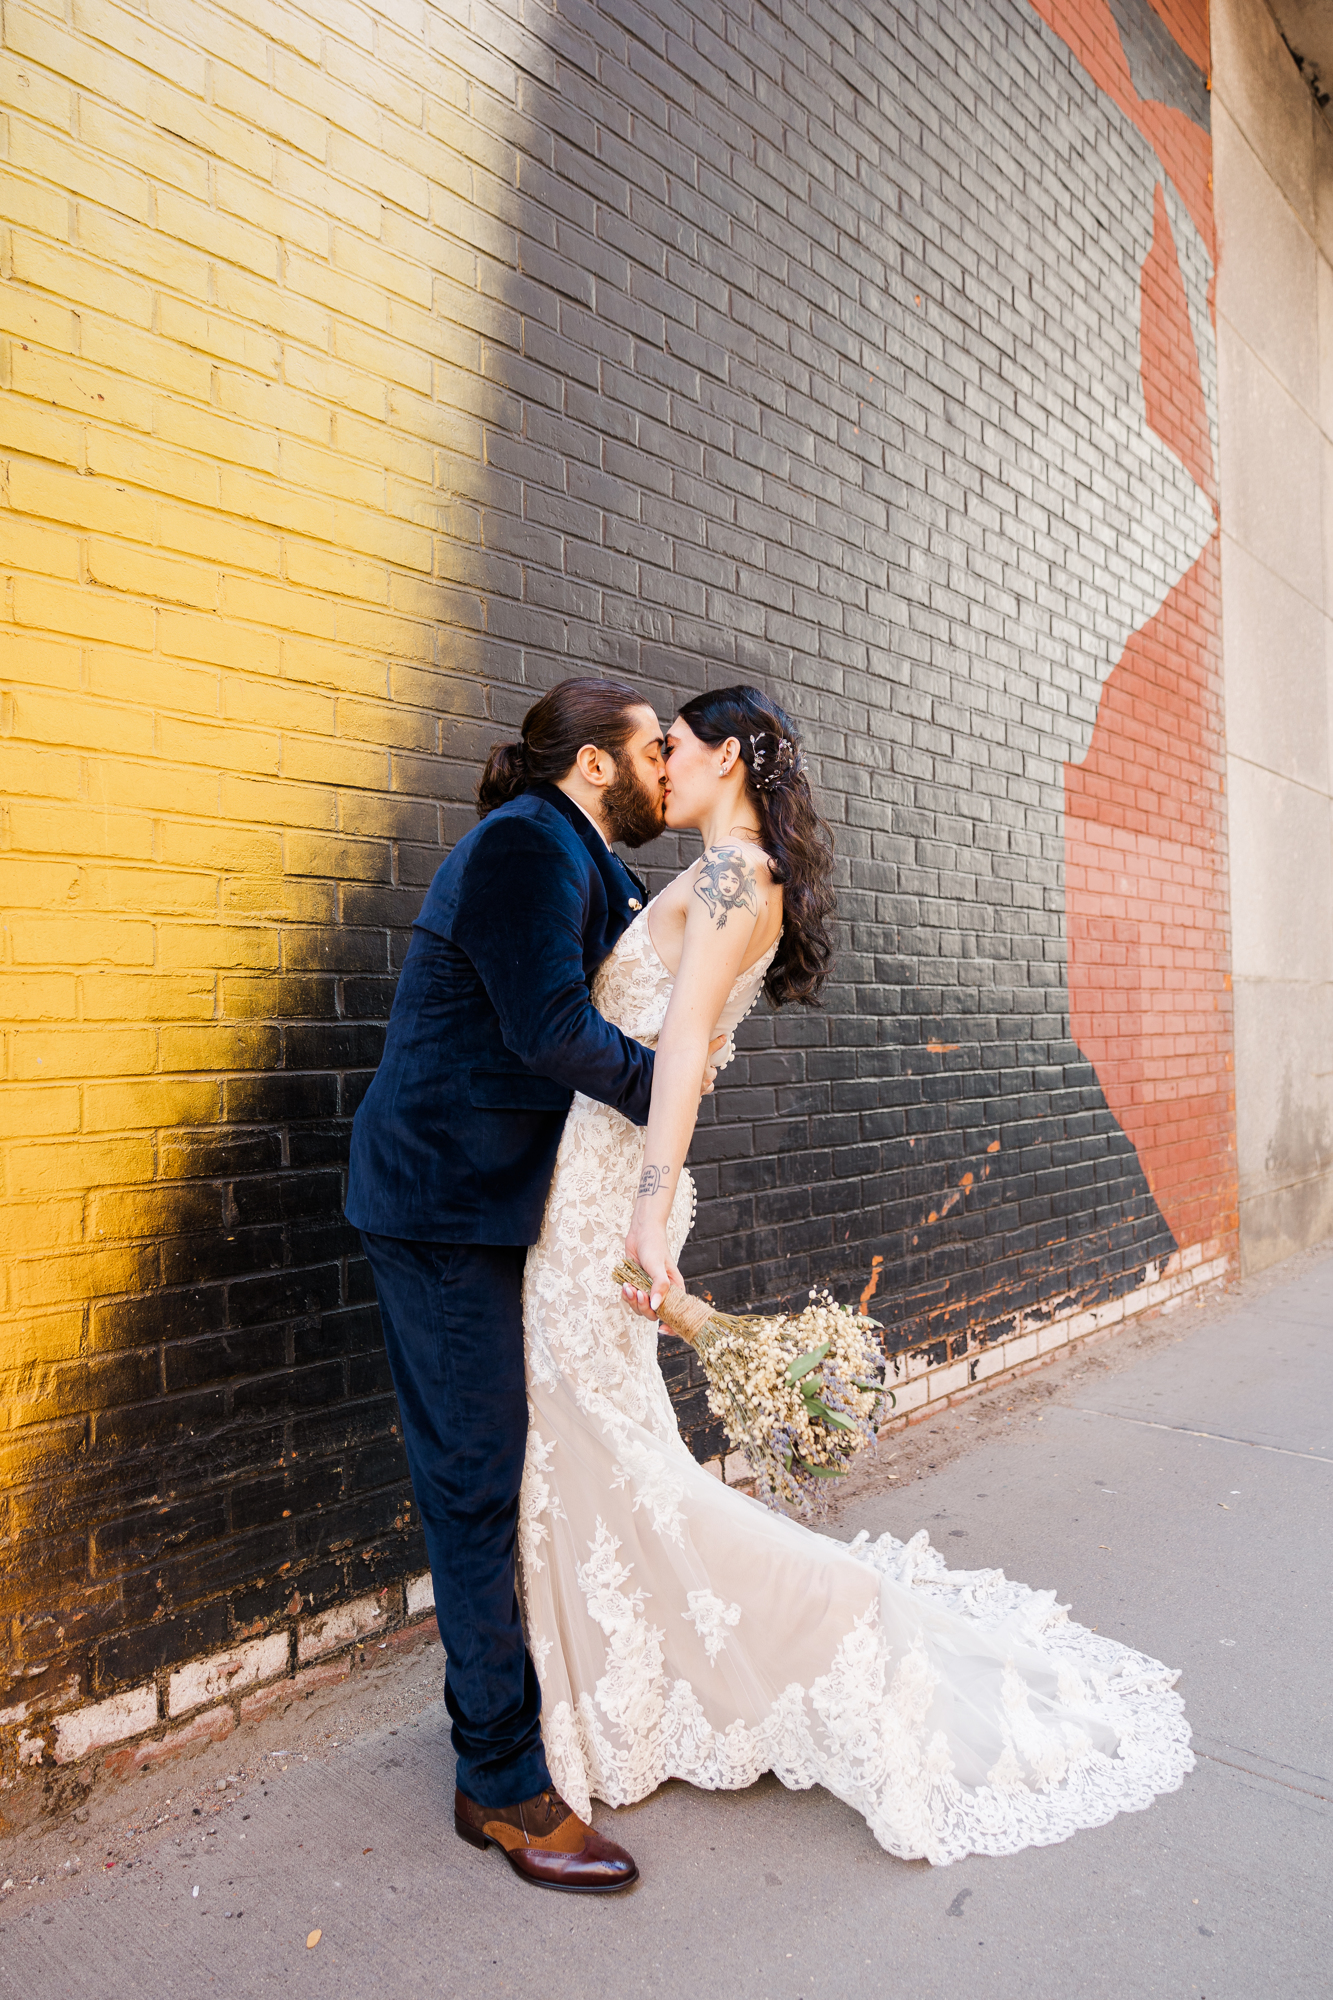 Best Restaurants to Eat at After a Jaw-Dropping DUMBO Elopement